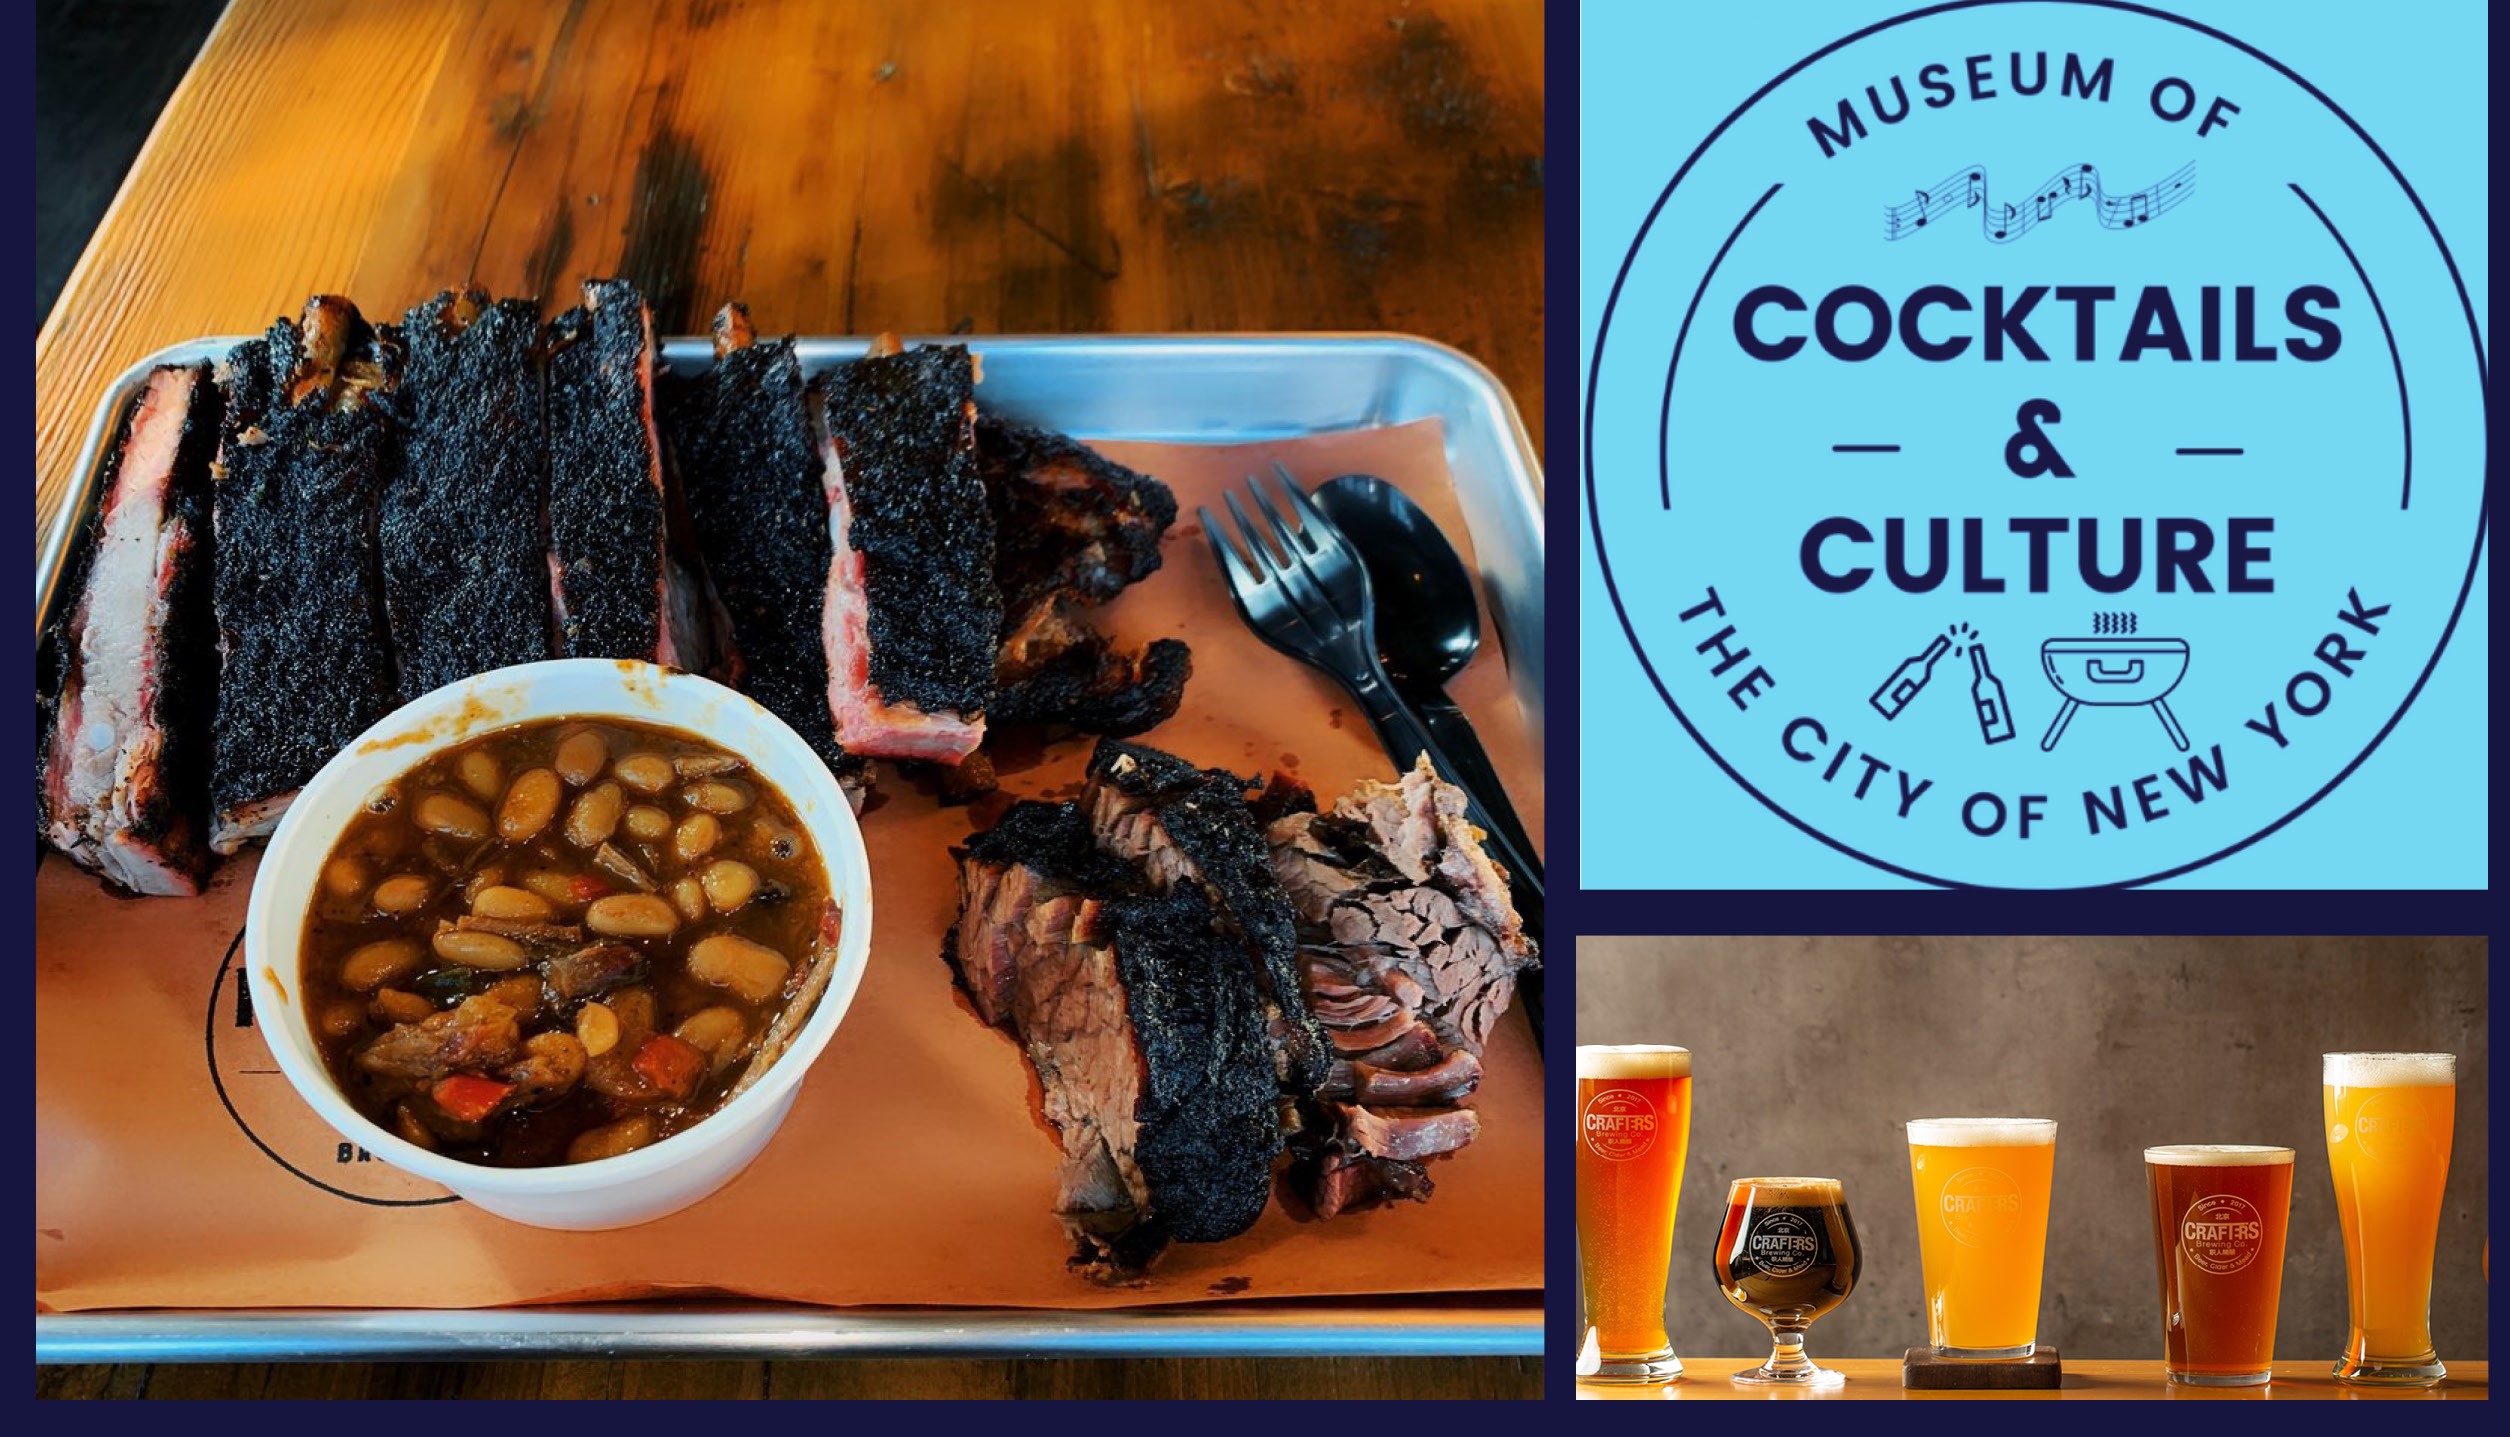 A collage of images depicting a BBQ plate, a row of beers of different sizes and the Cocktails & Culture logo in blue.